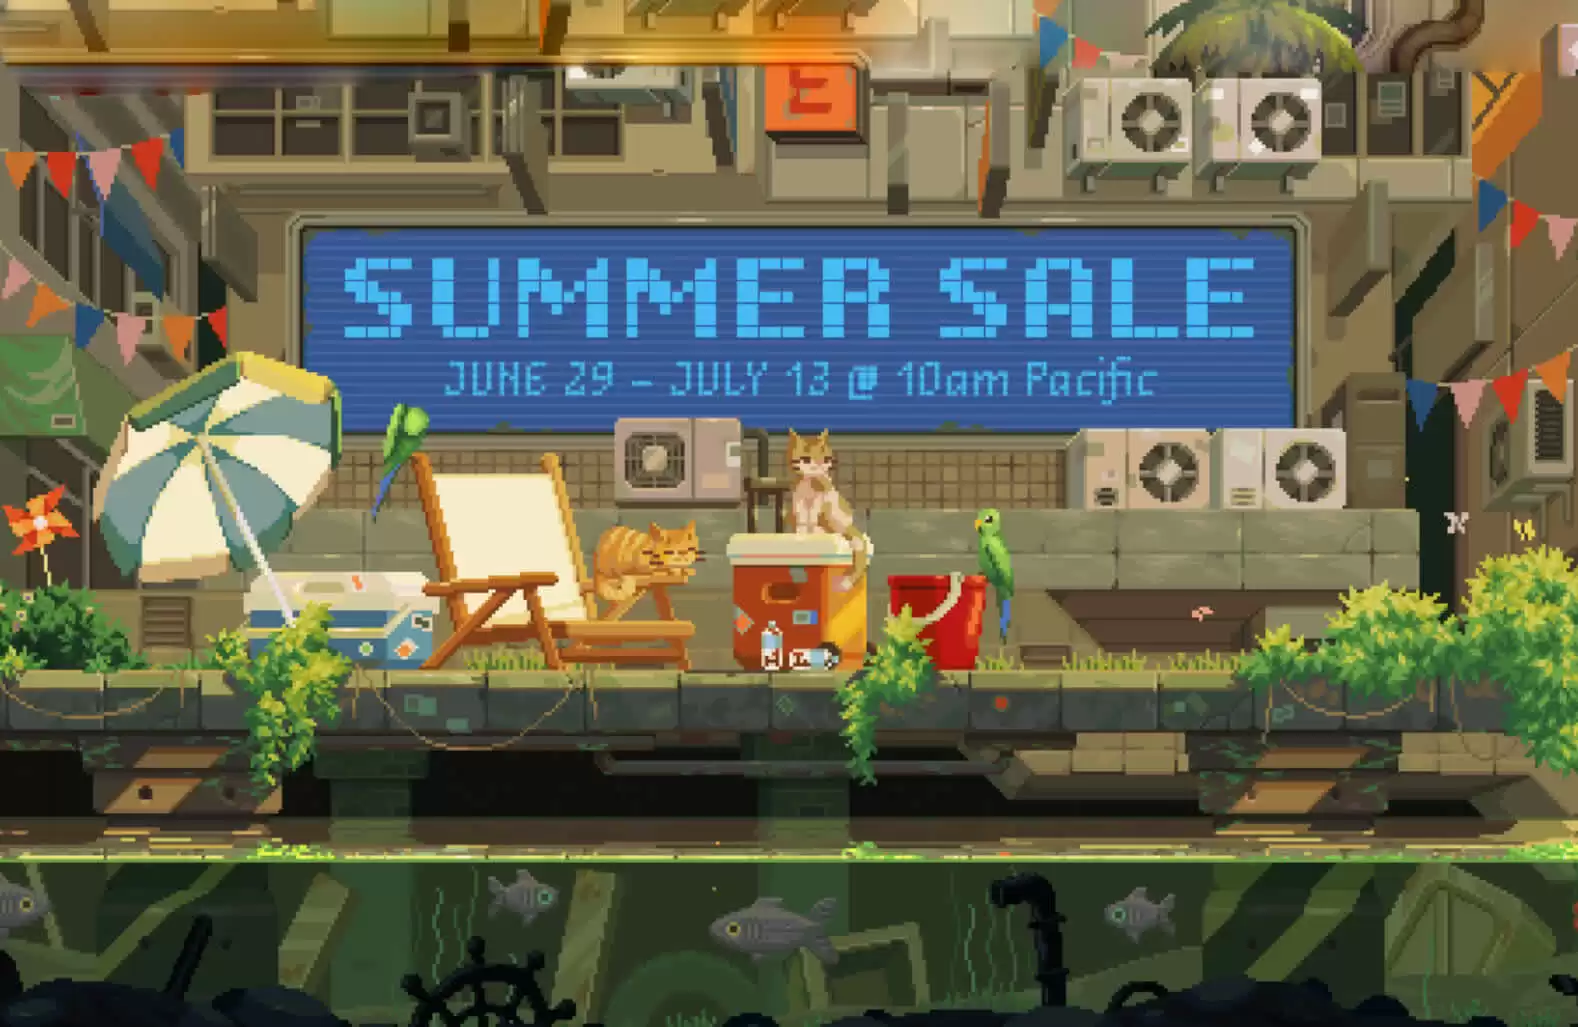 Steam Summer Sale commences, offering up to a 20% discount on the Steam Deck.